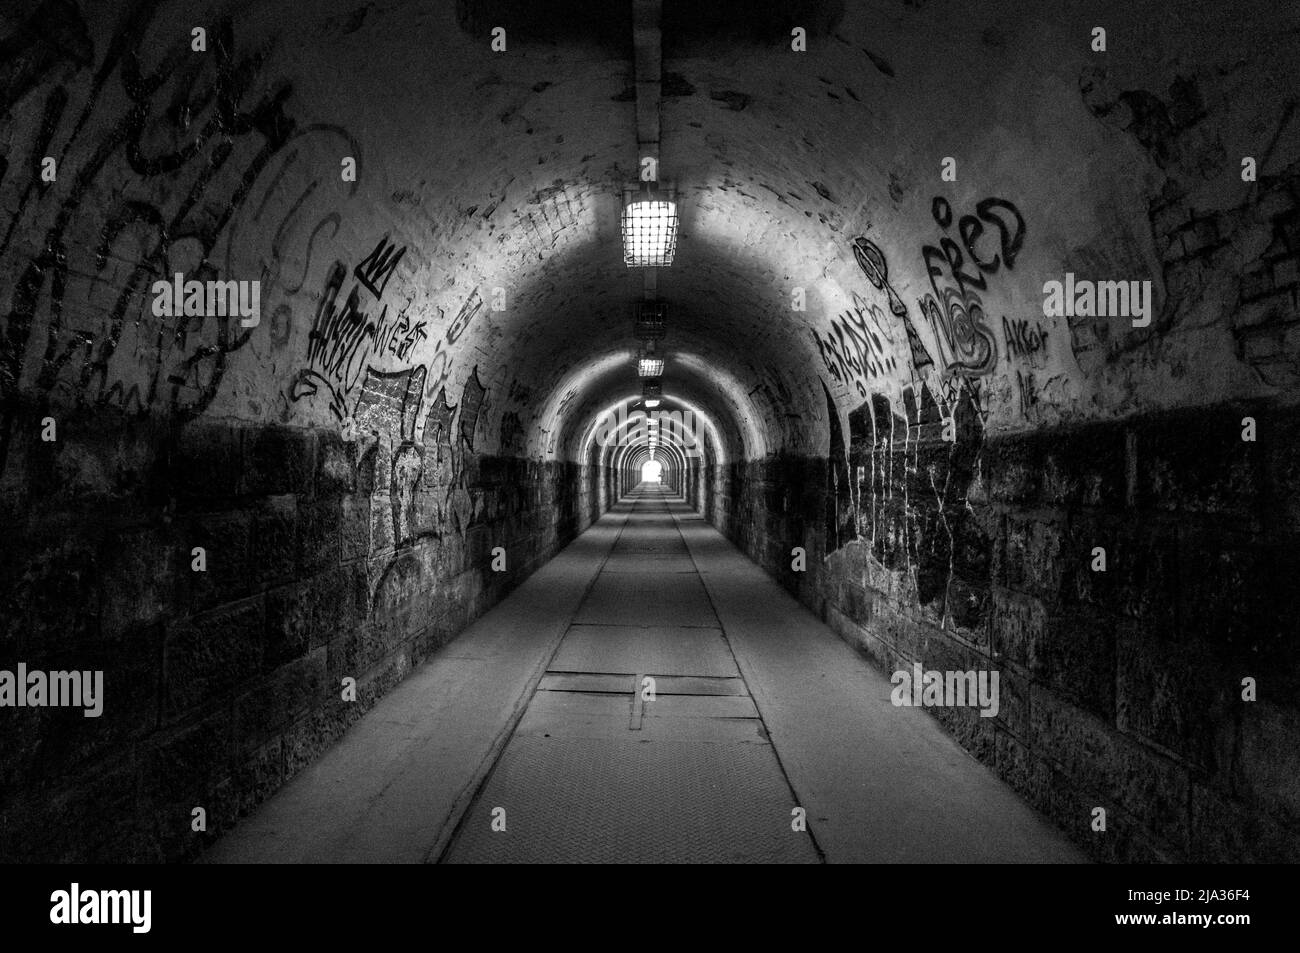 Budapest, Hungary - March 25, 2018: Light at the end of tunnel black and white.Grain added Stock Photo